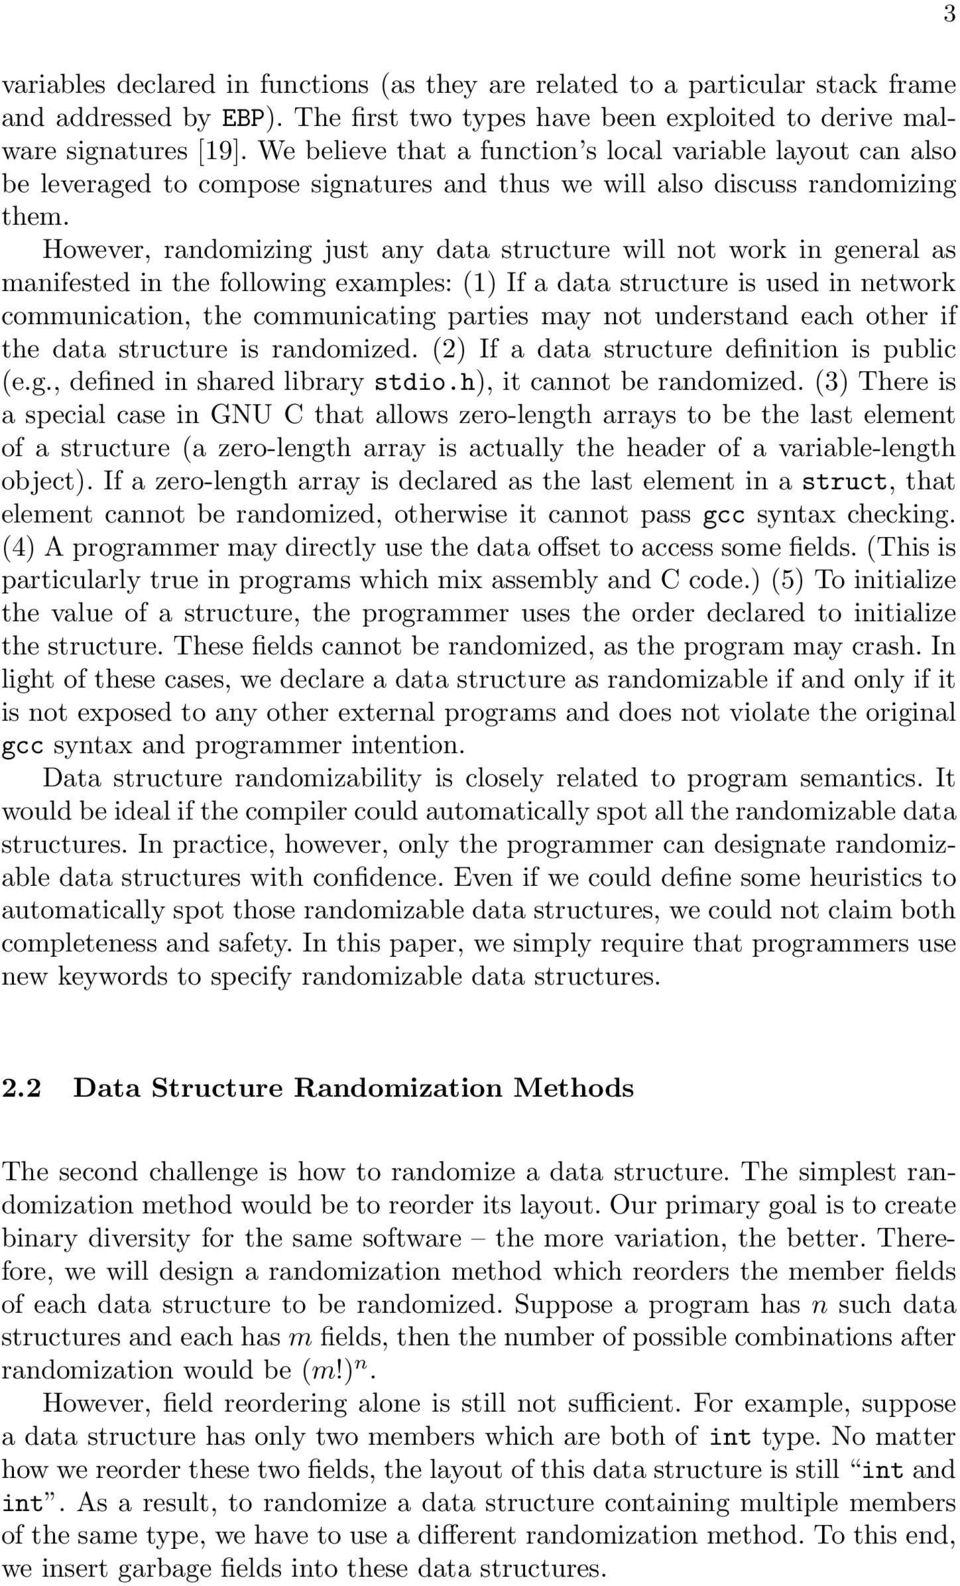 However, randomizing just any data structure will not work in general as manifested in the following examples: (1) If a data structure is used in network communication, the communicating parties may